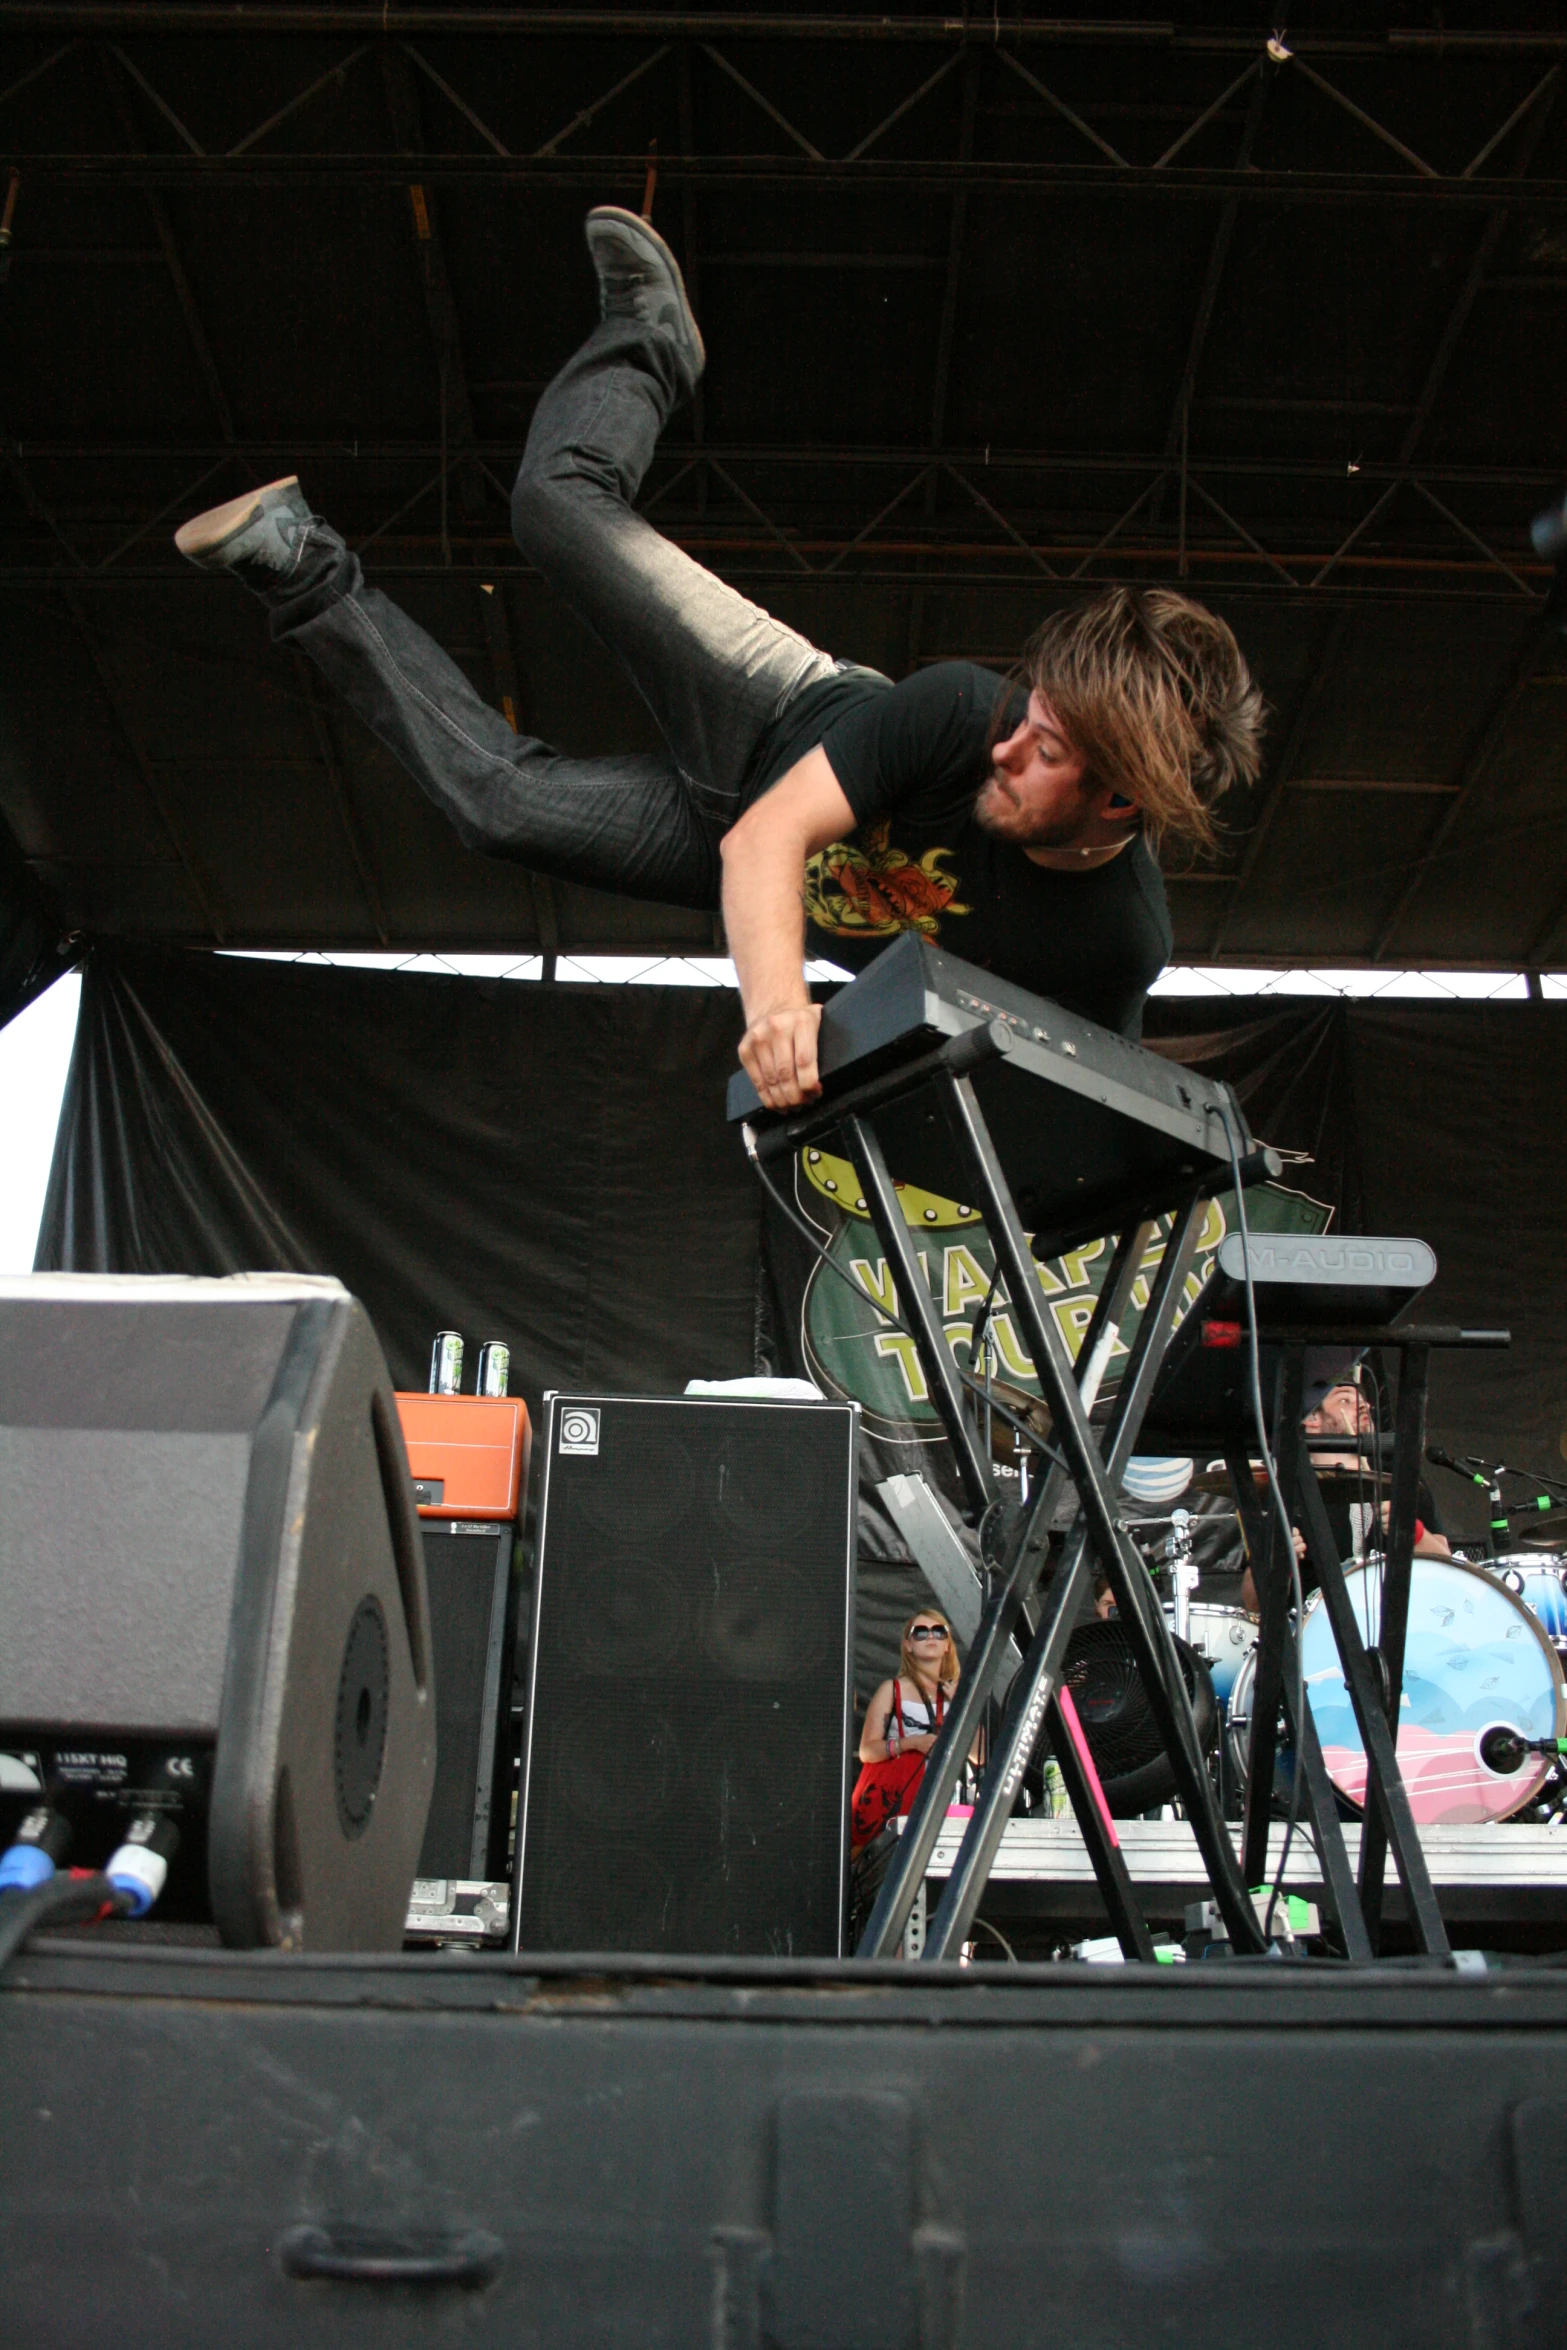 a man is jumping in the air with his feet up